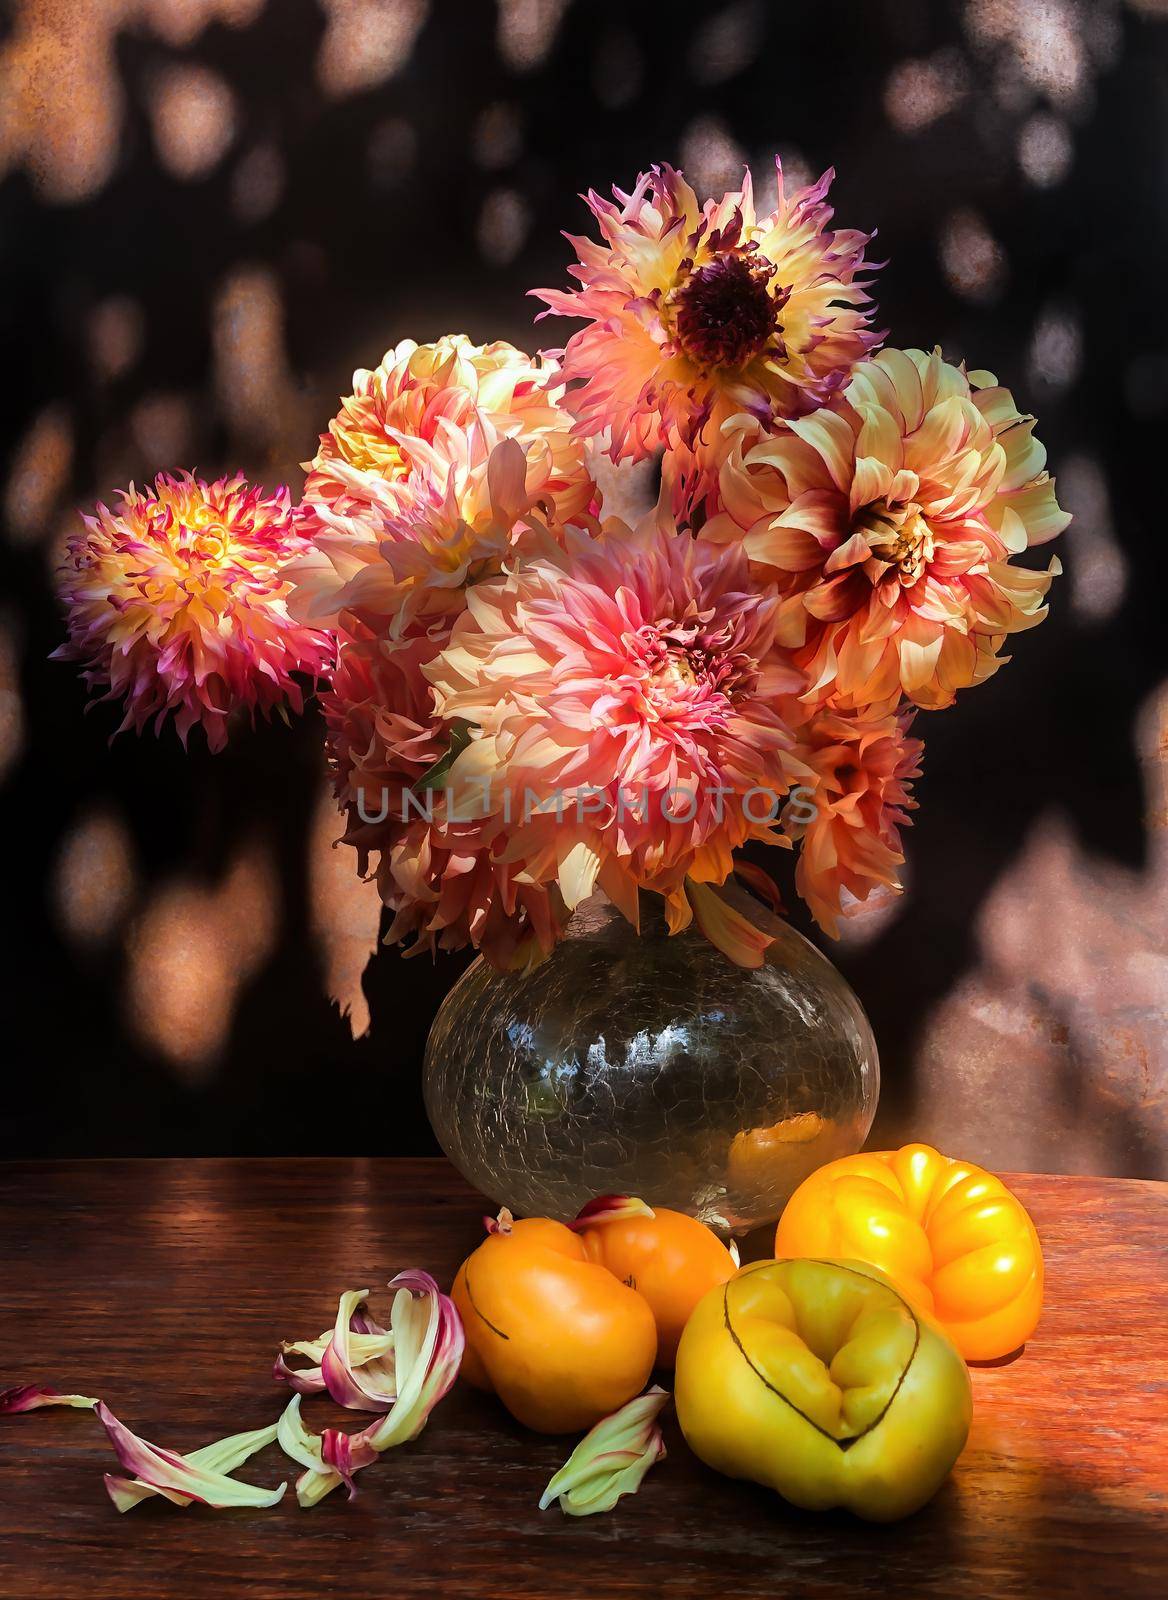 Romantic bouquet with dahlias and tomatoes by palinchak